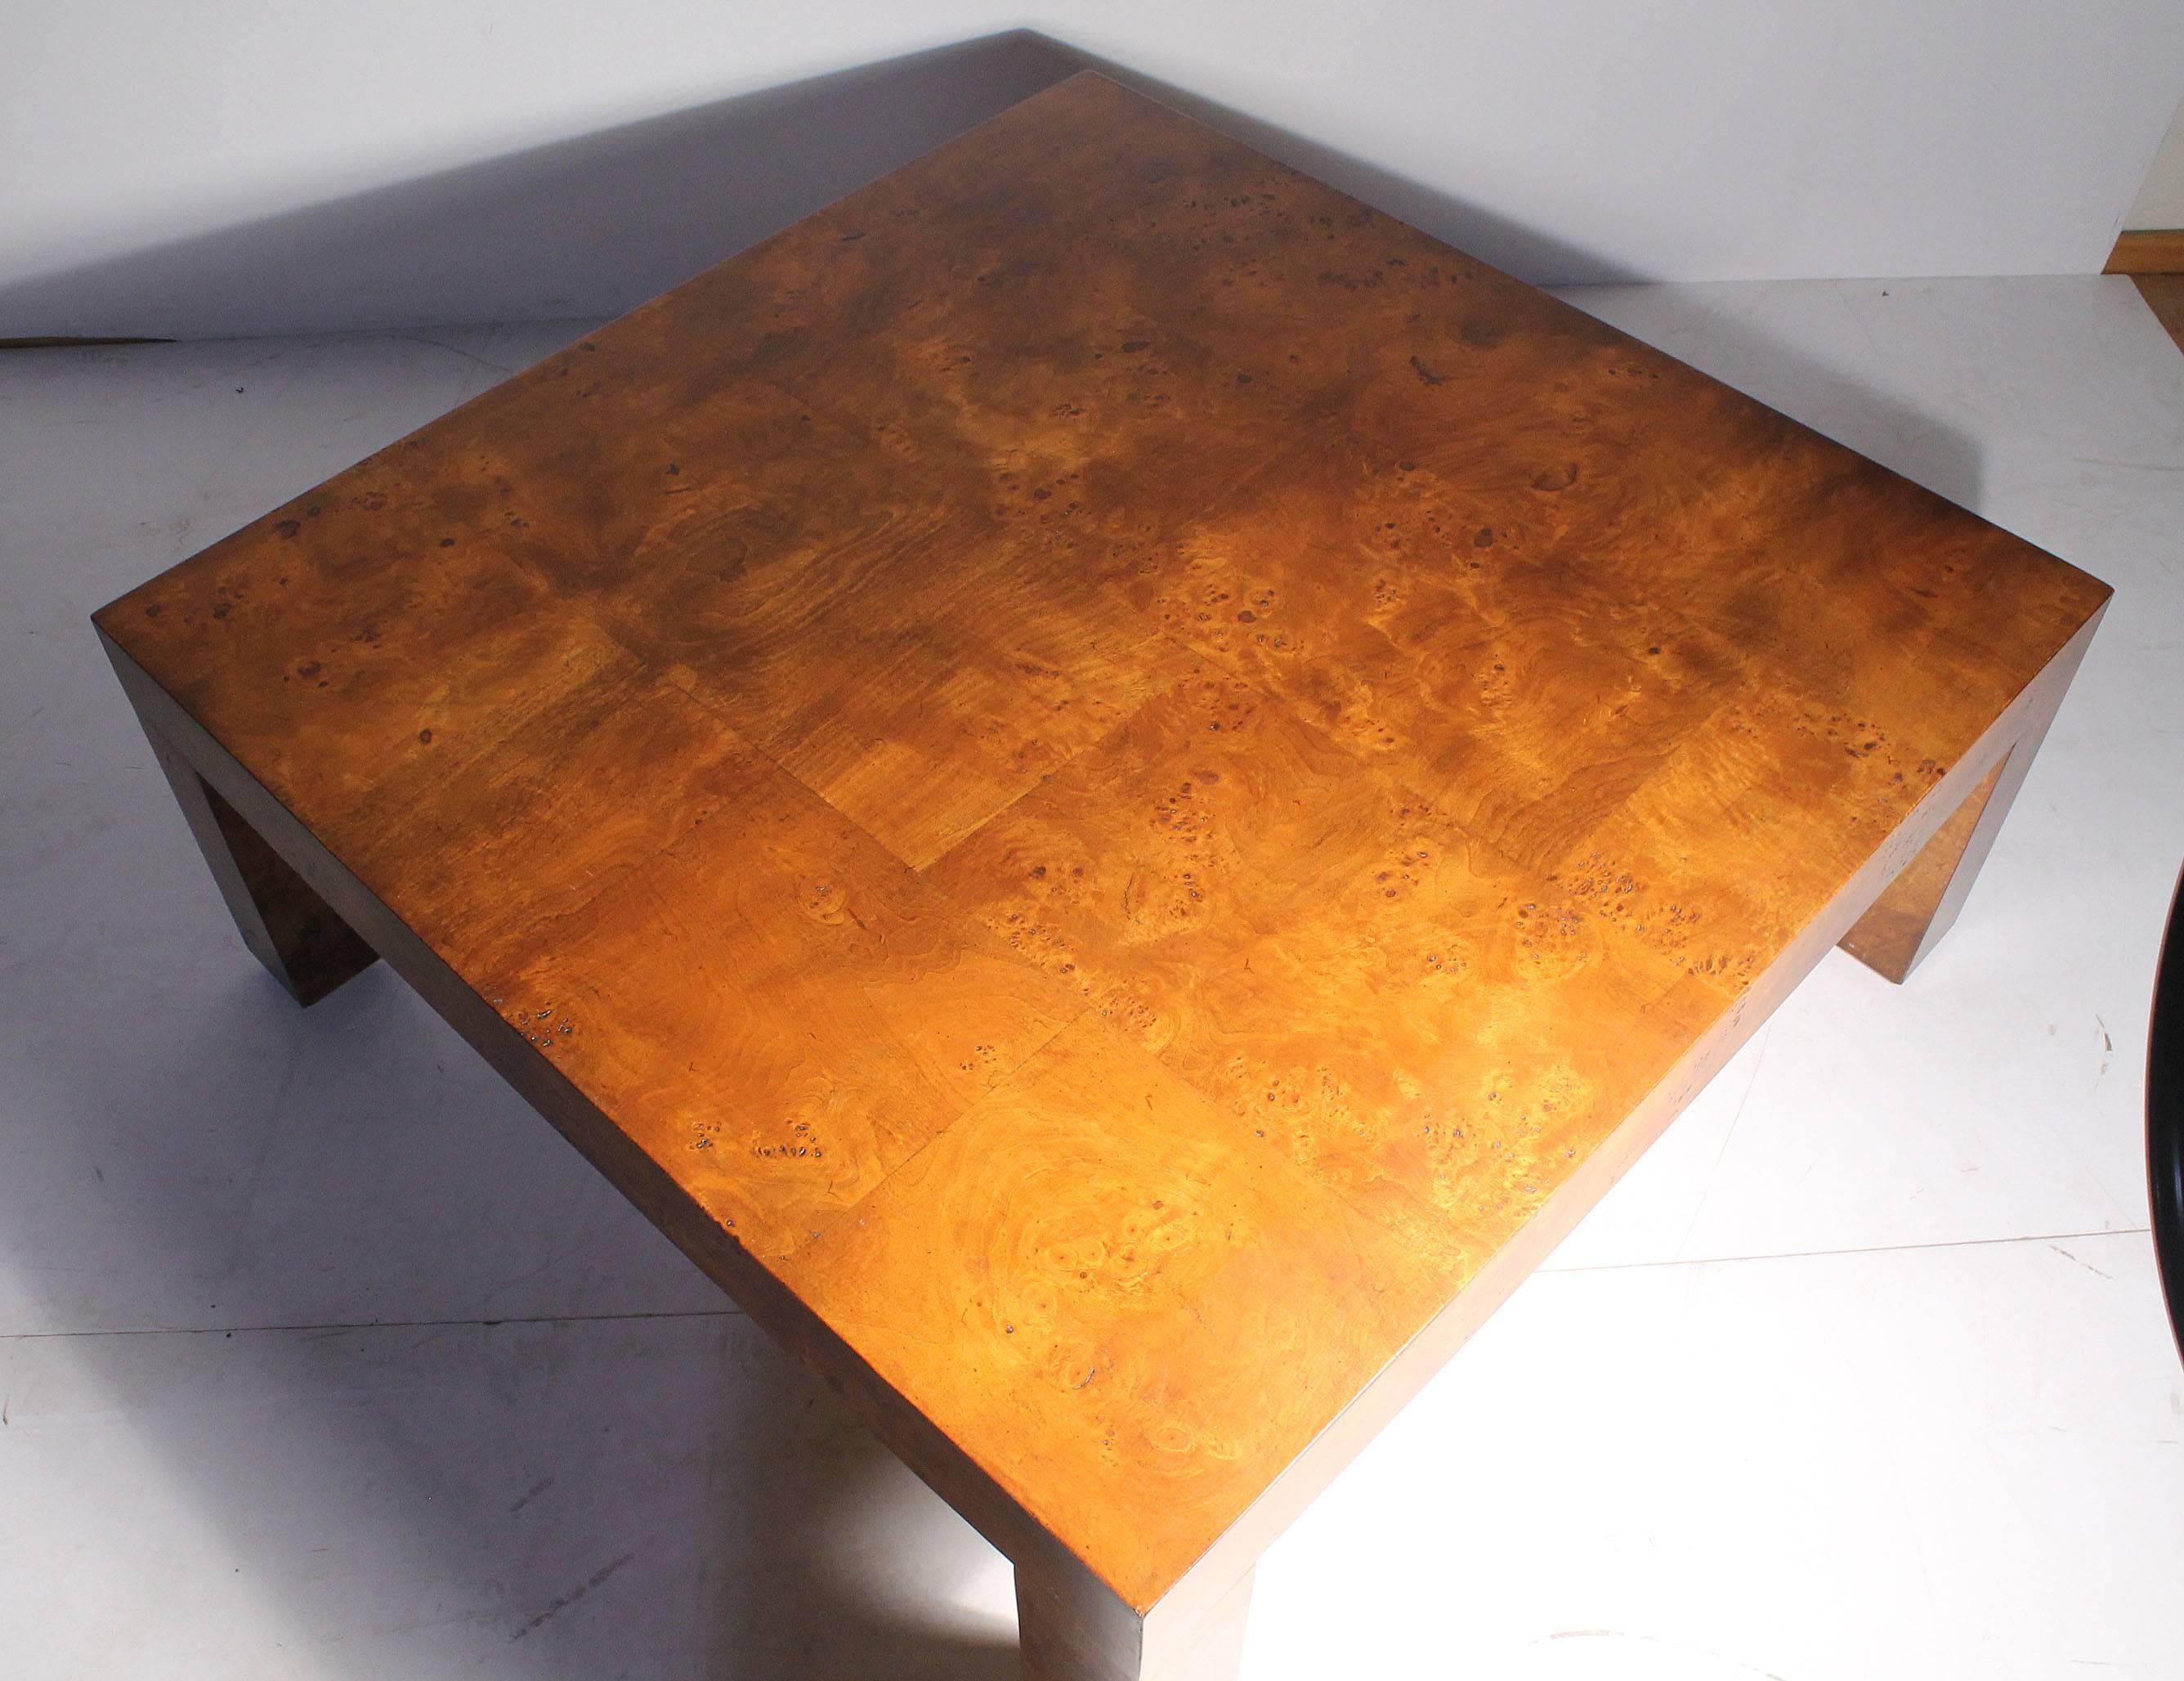 Milo Baughman burl patchwork Parsons coffee table. A nicely proportioned form with thick legs. Very practical size for a room.